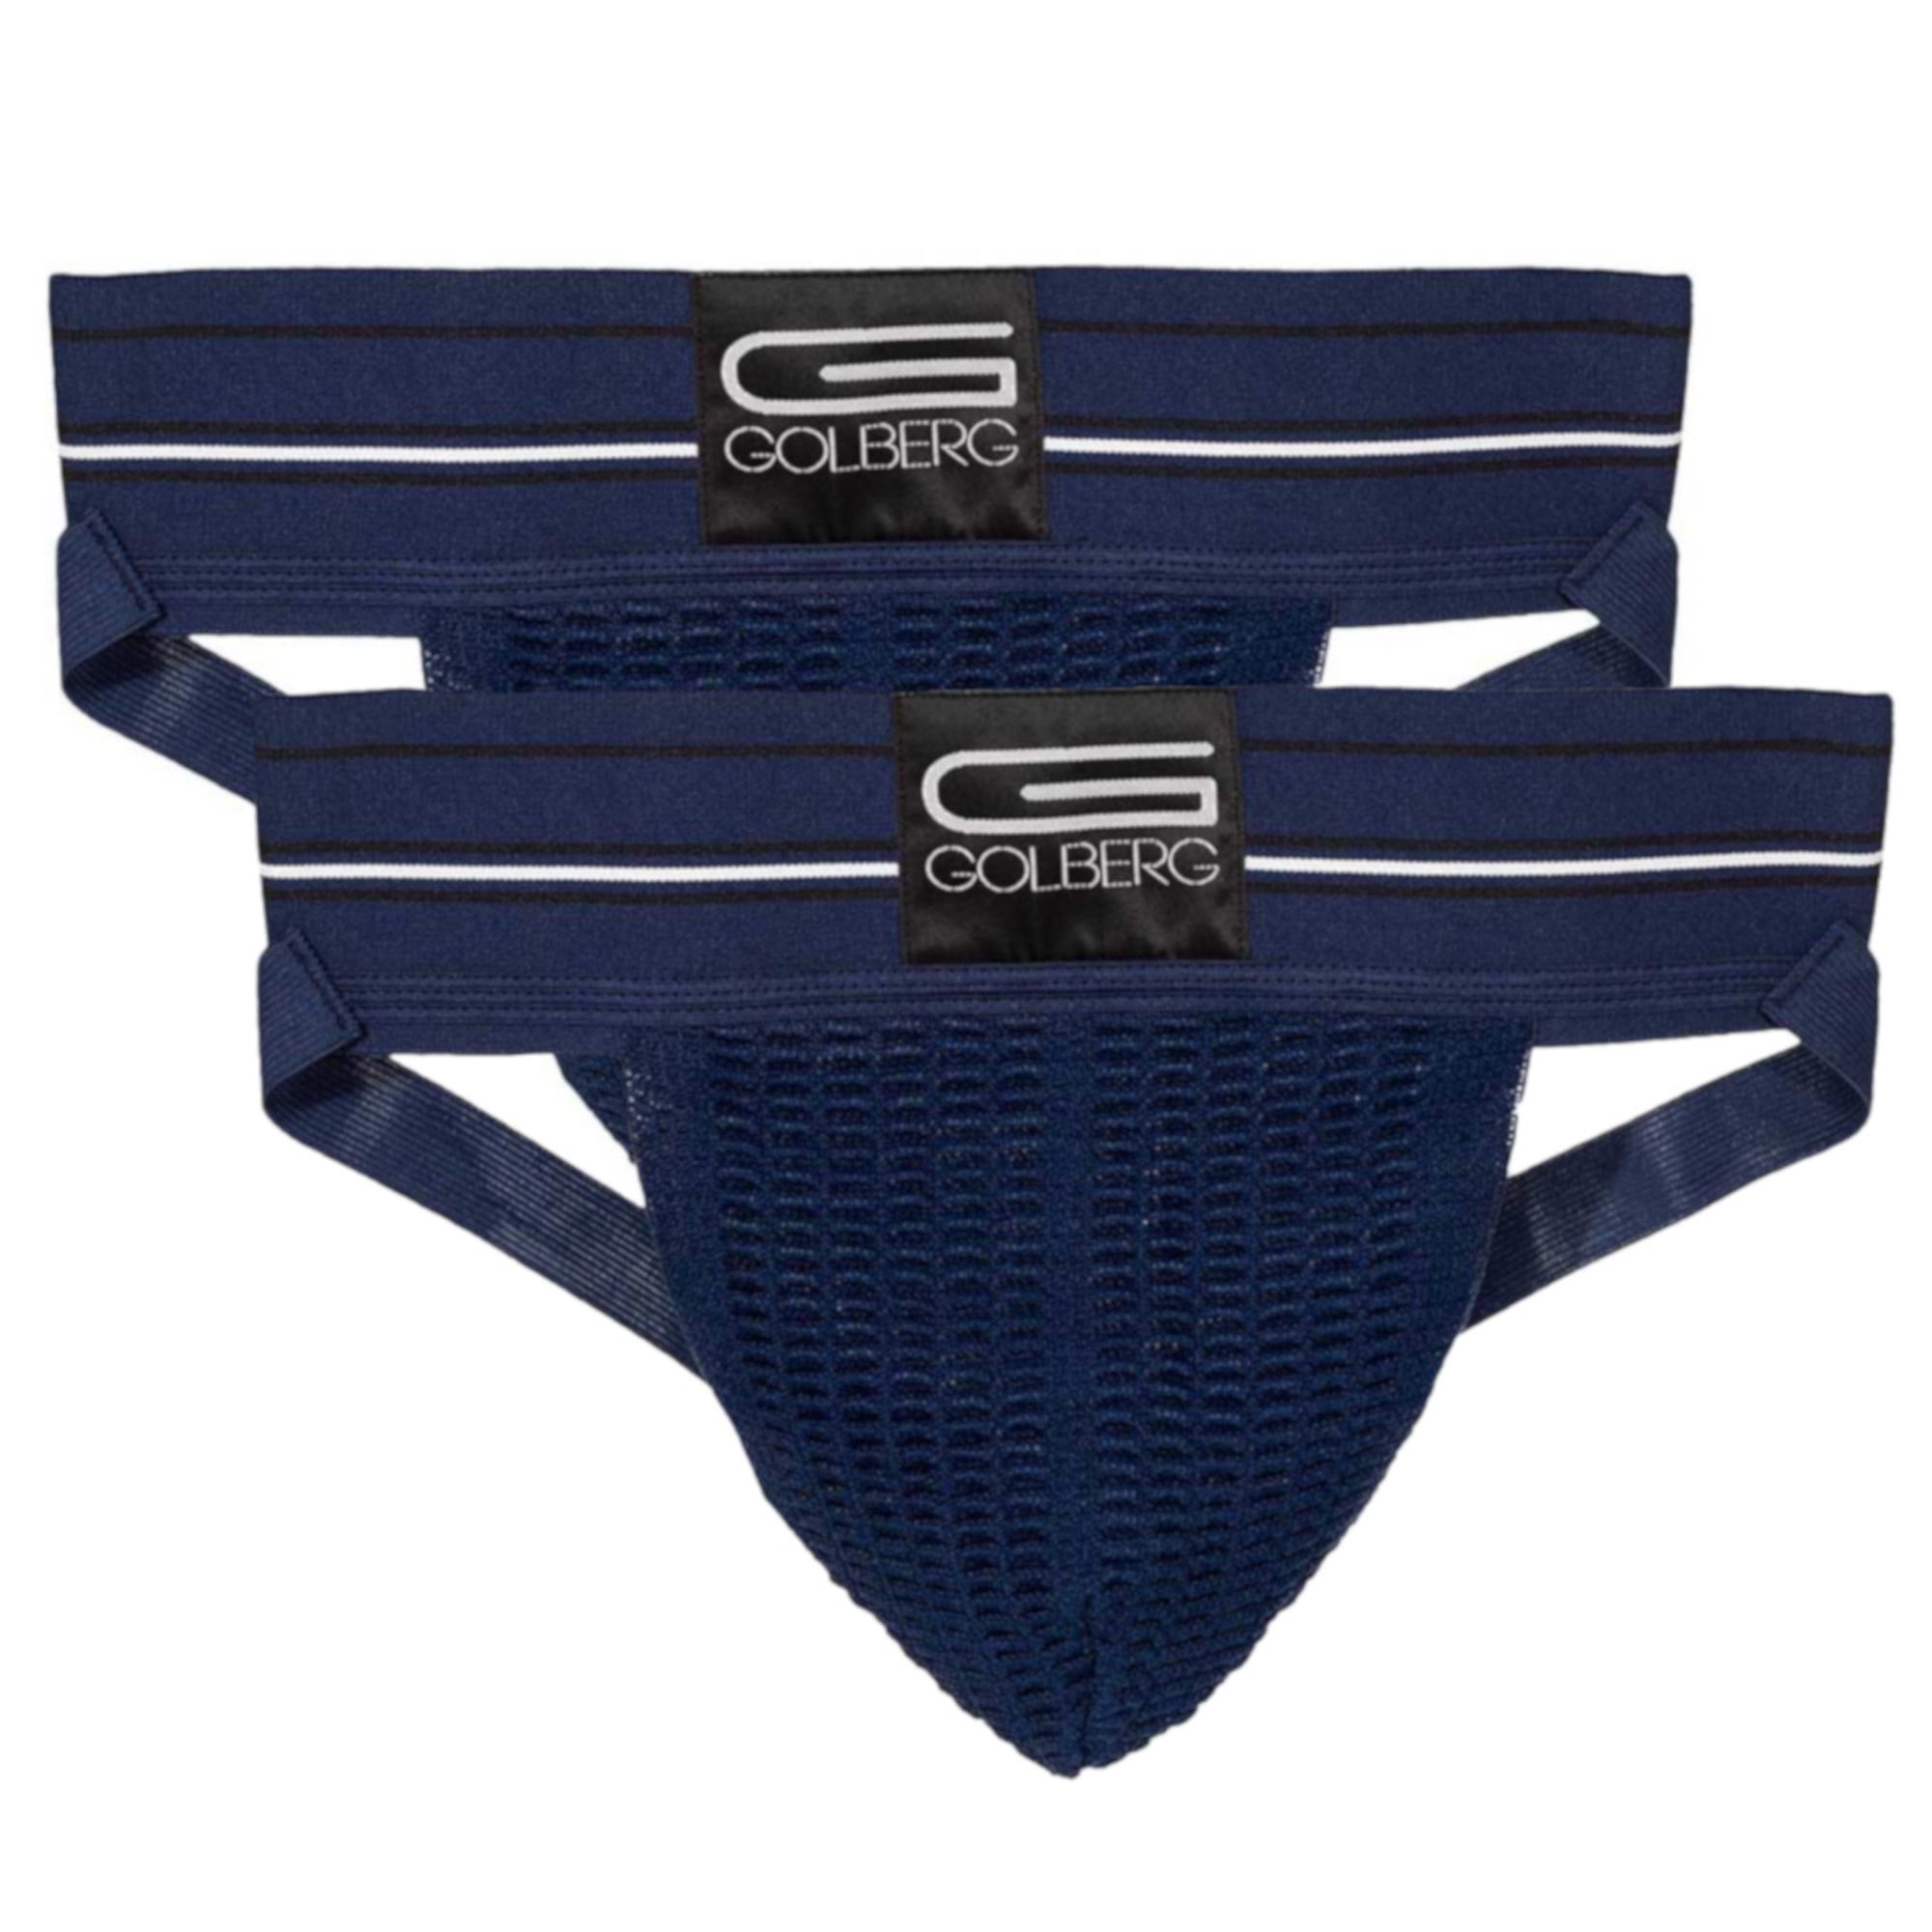 Contoured Waistband Golberg Athletic Supporters 4 Pack in Assorted Colors